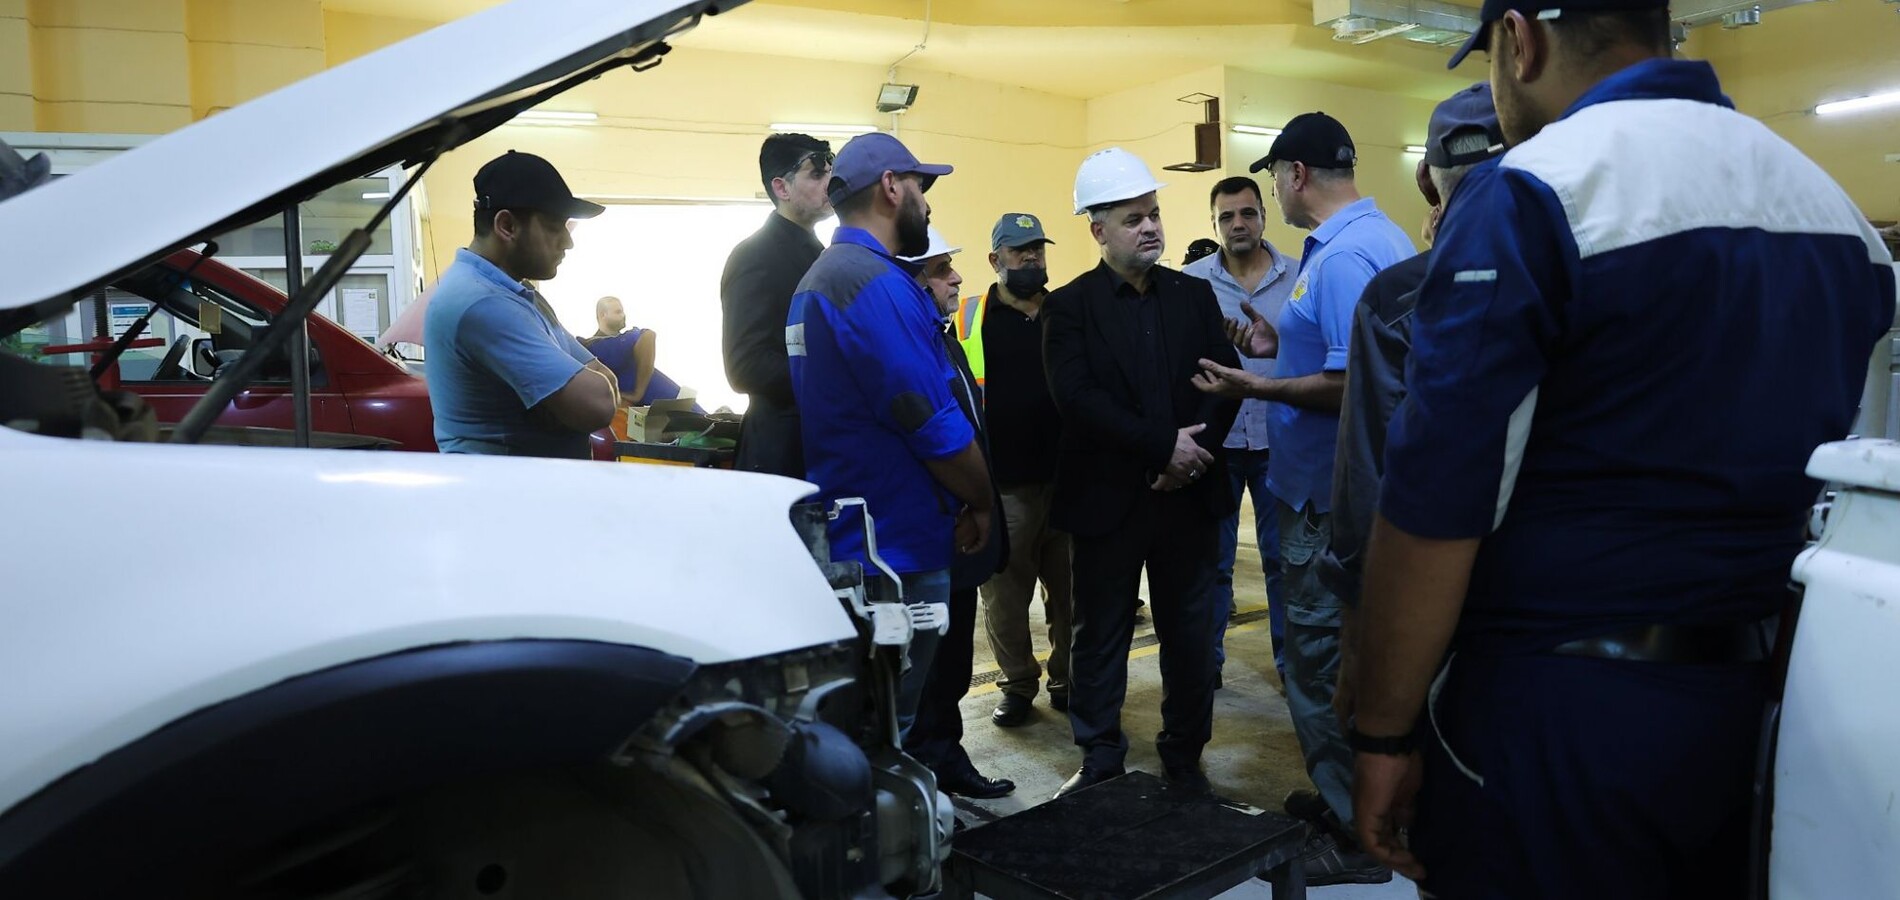 The D G of Oil Exploration Company visits the Engineering dept. in Al Nahrawan district